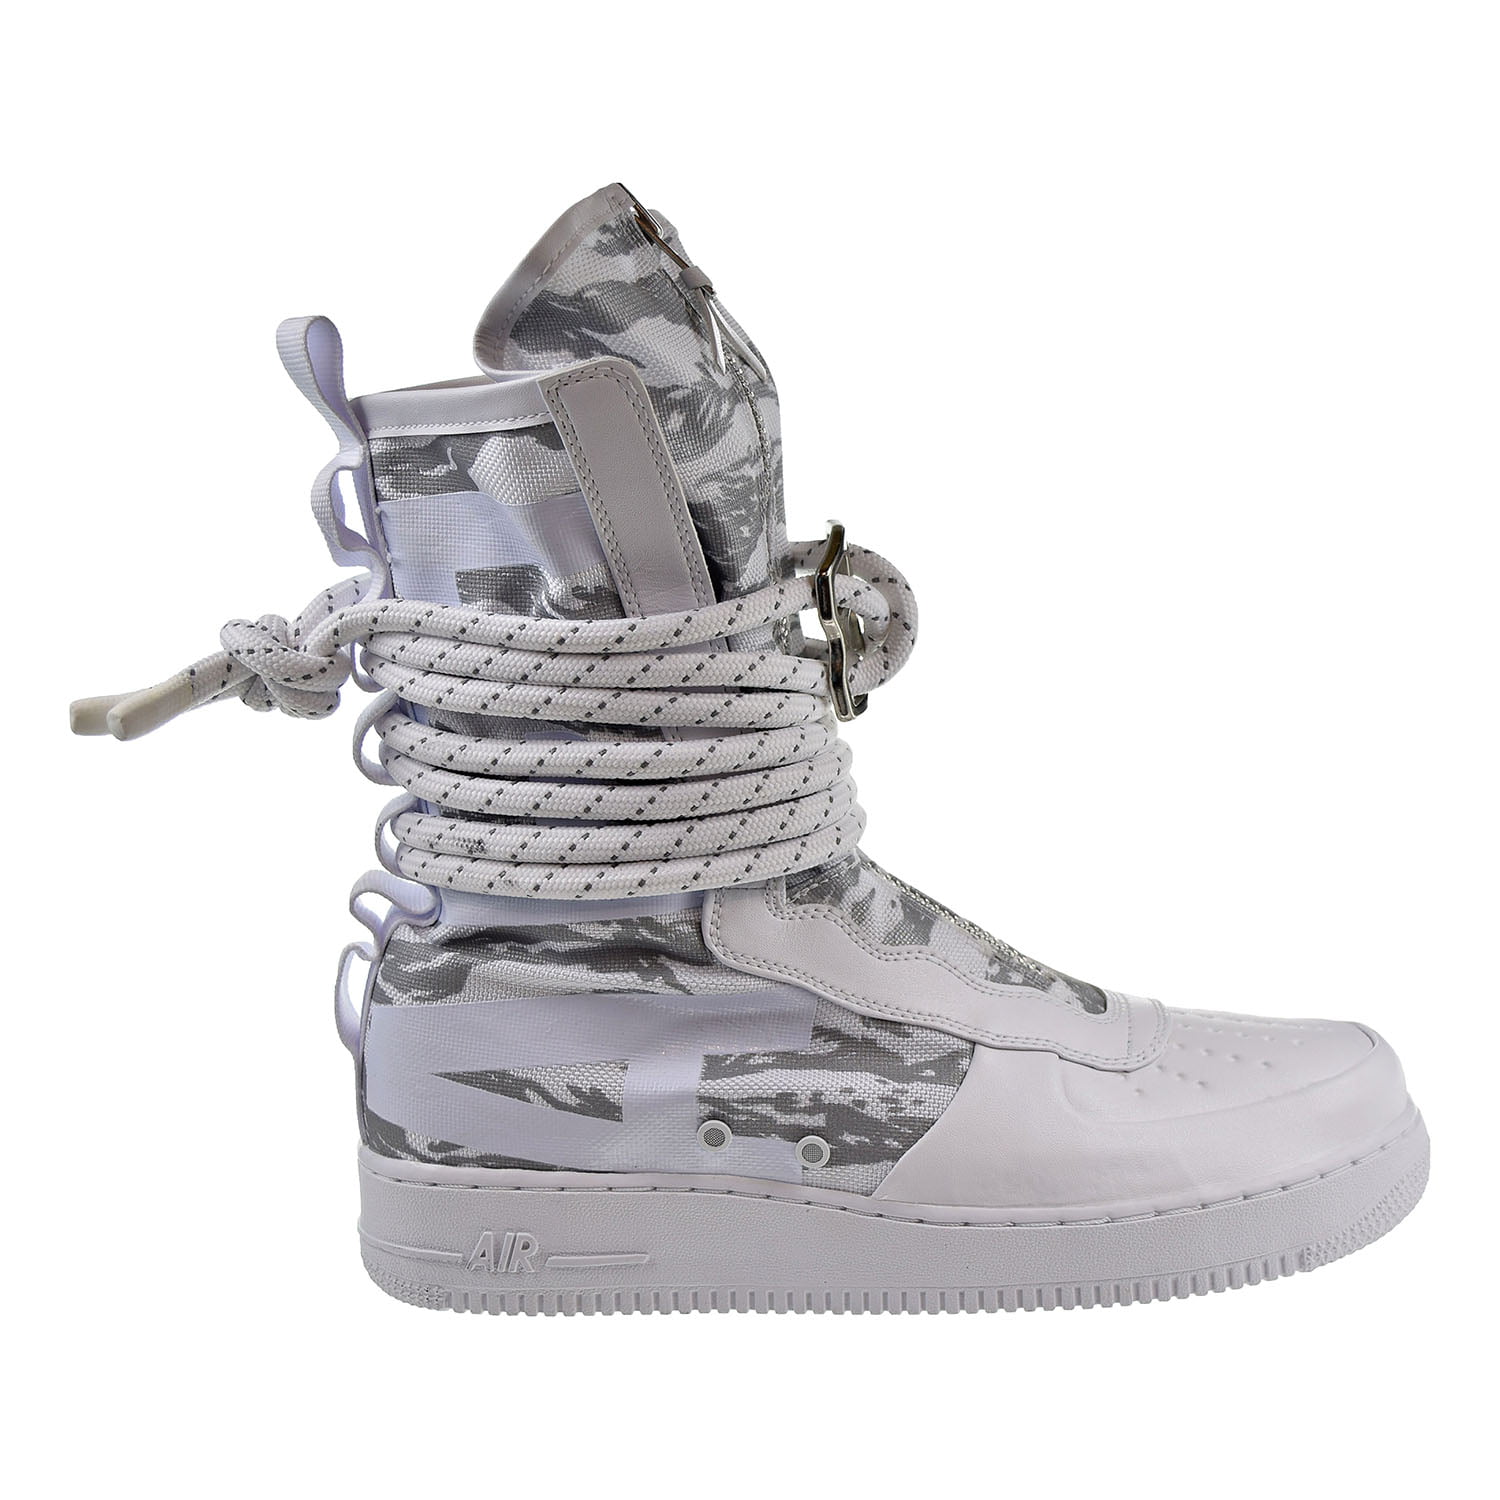 nike air force 1 boots white